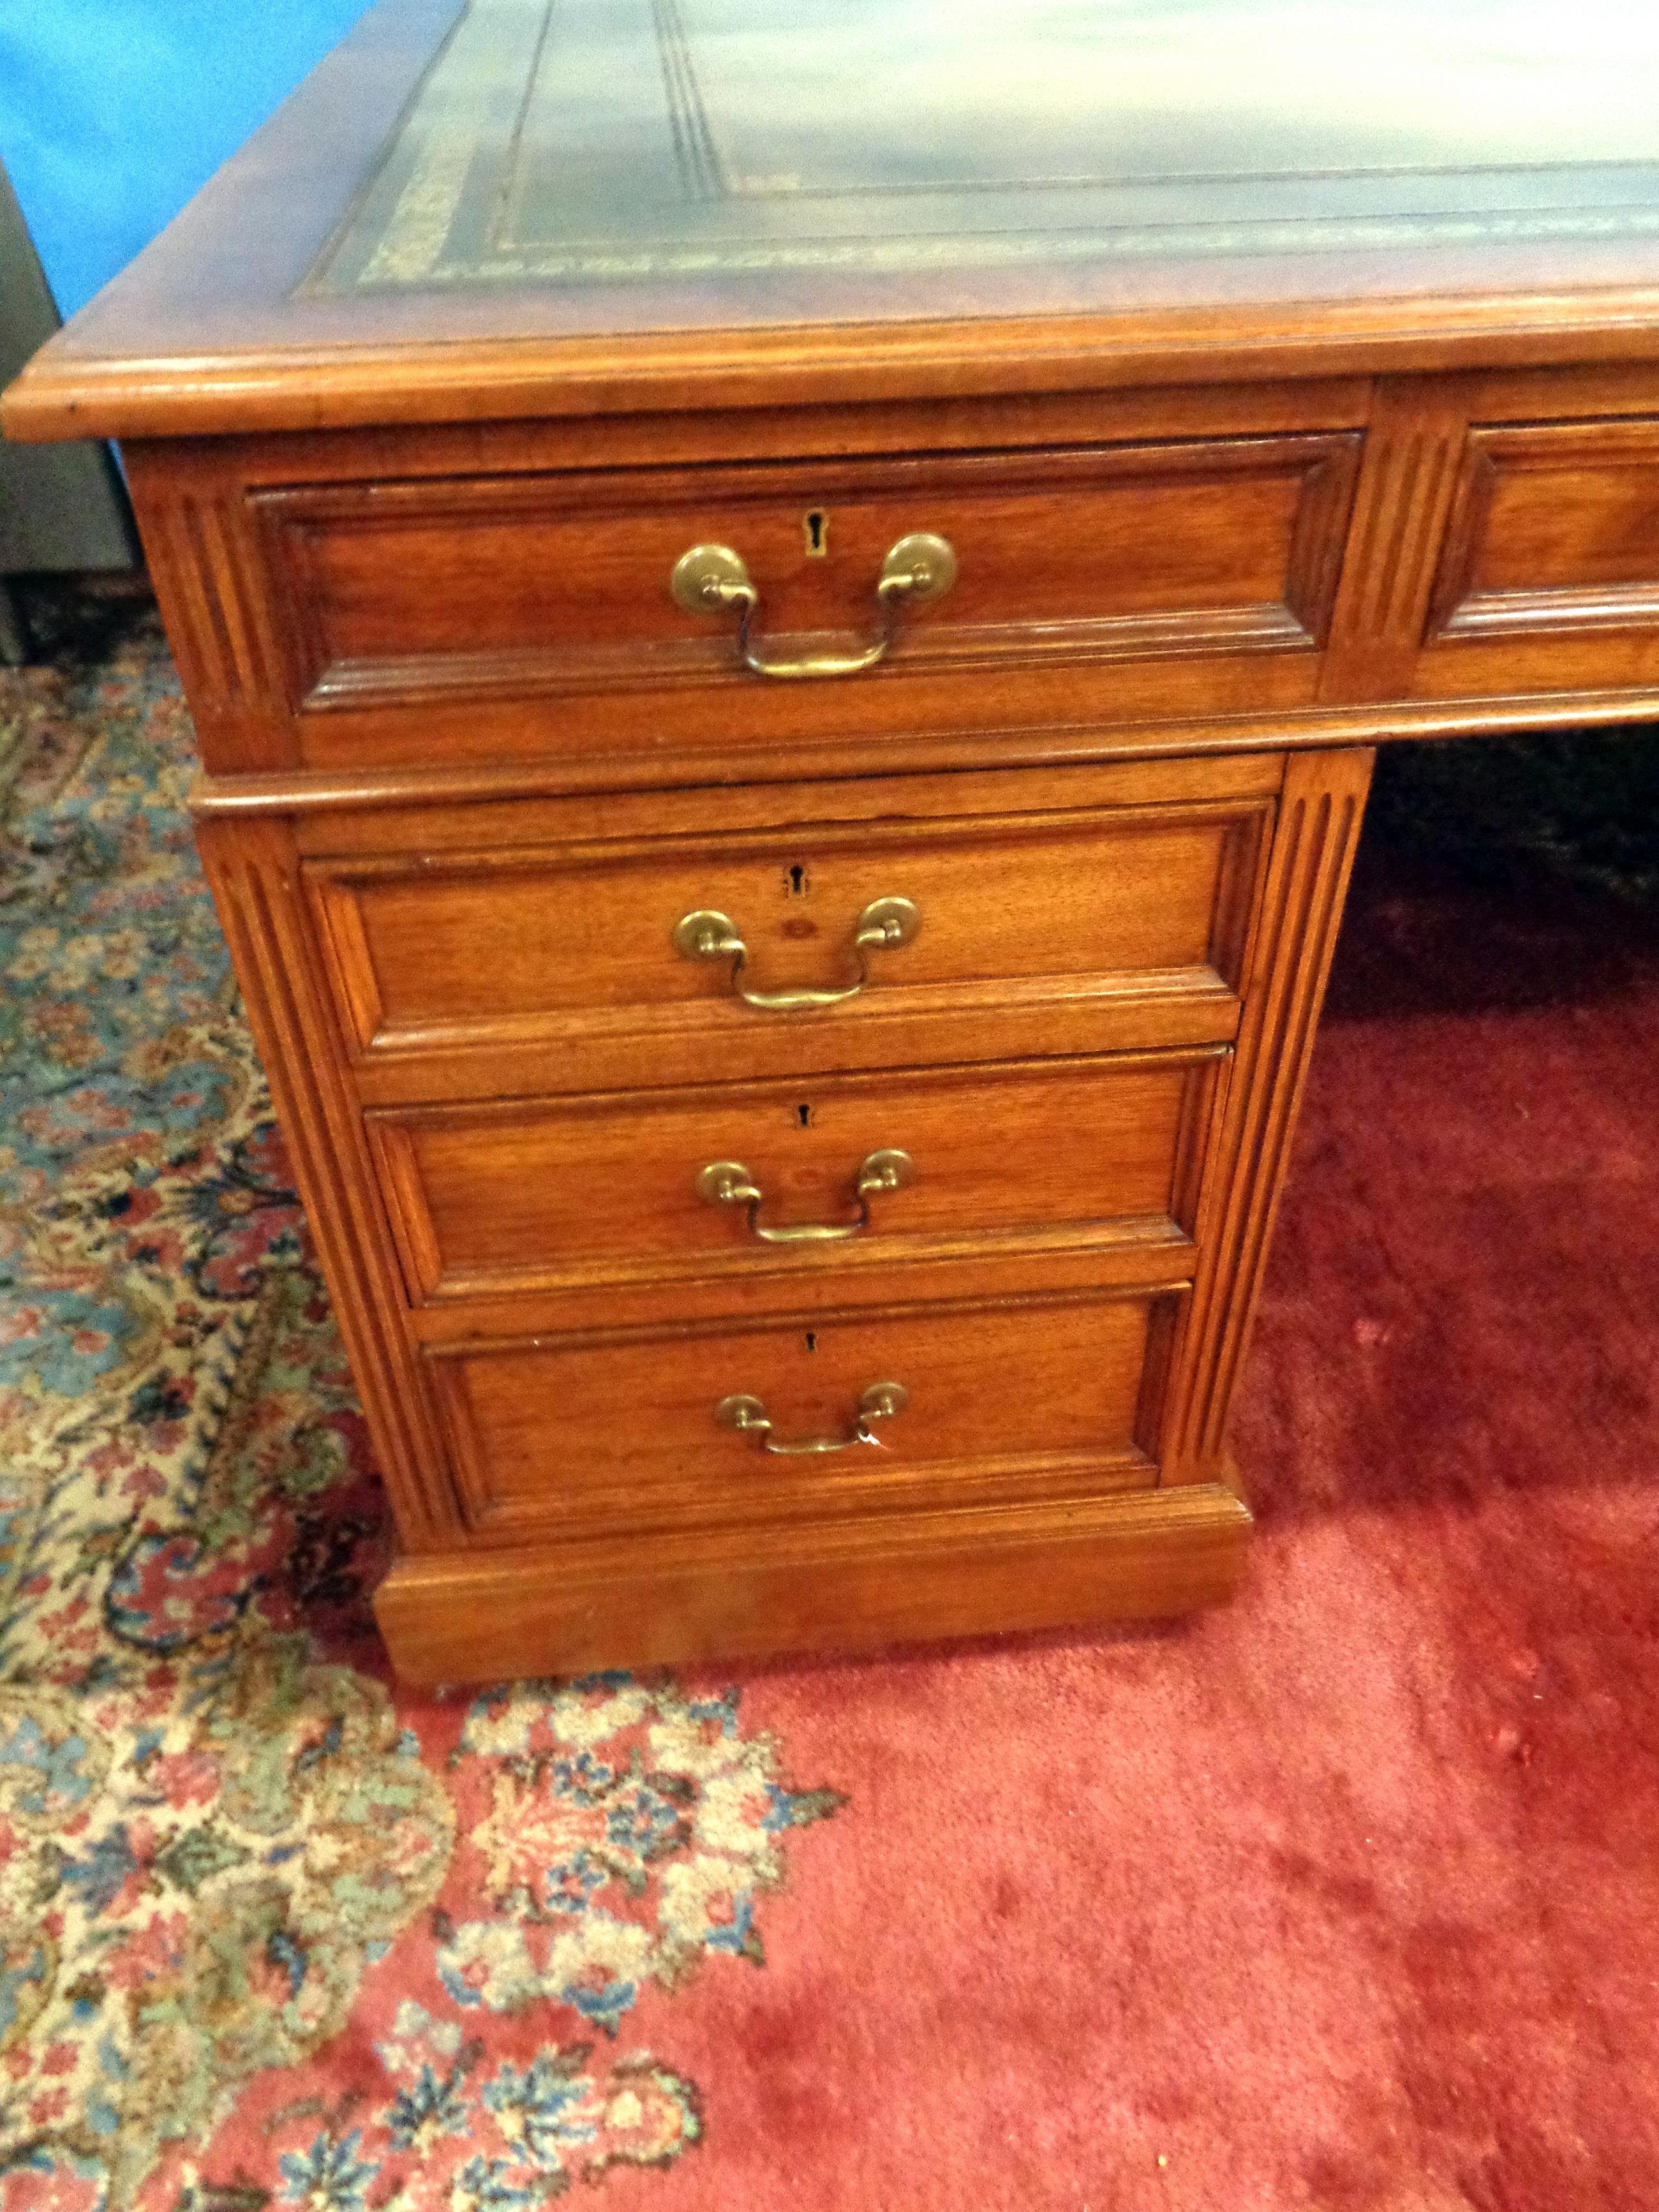 Fine English large mahogany partners desk with gold tooled leather top by noted maker Maple & Co.. There are drawers and cupboards on both sides and bail pulls on the drawers. This is a beautiful highly functional desk with a large central opening.